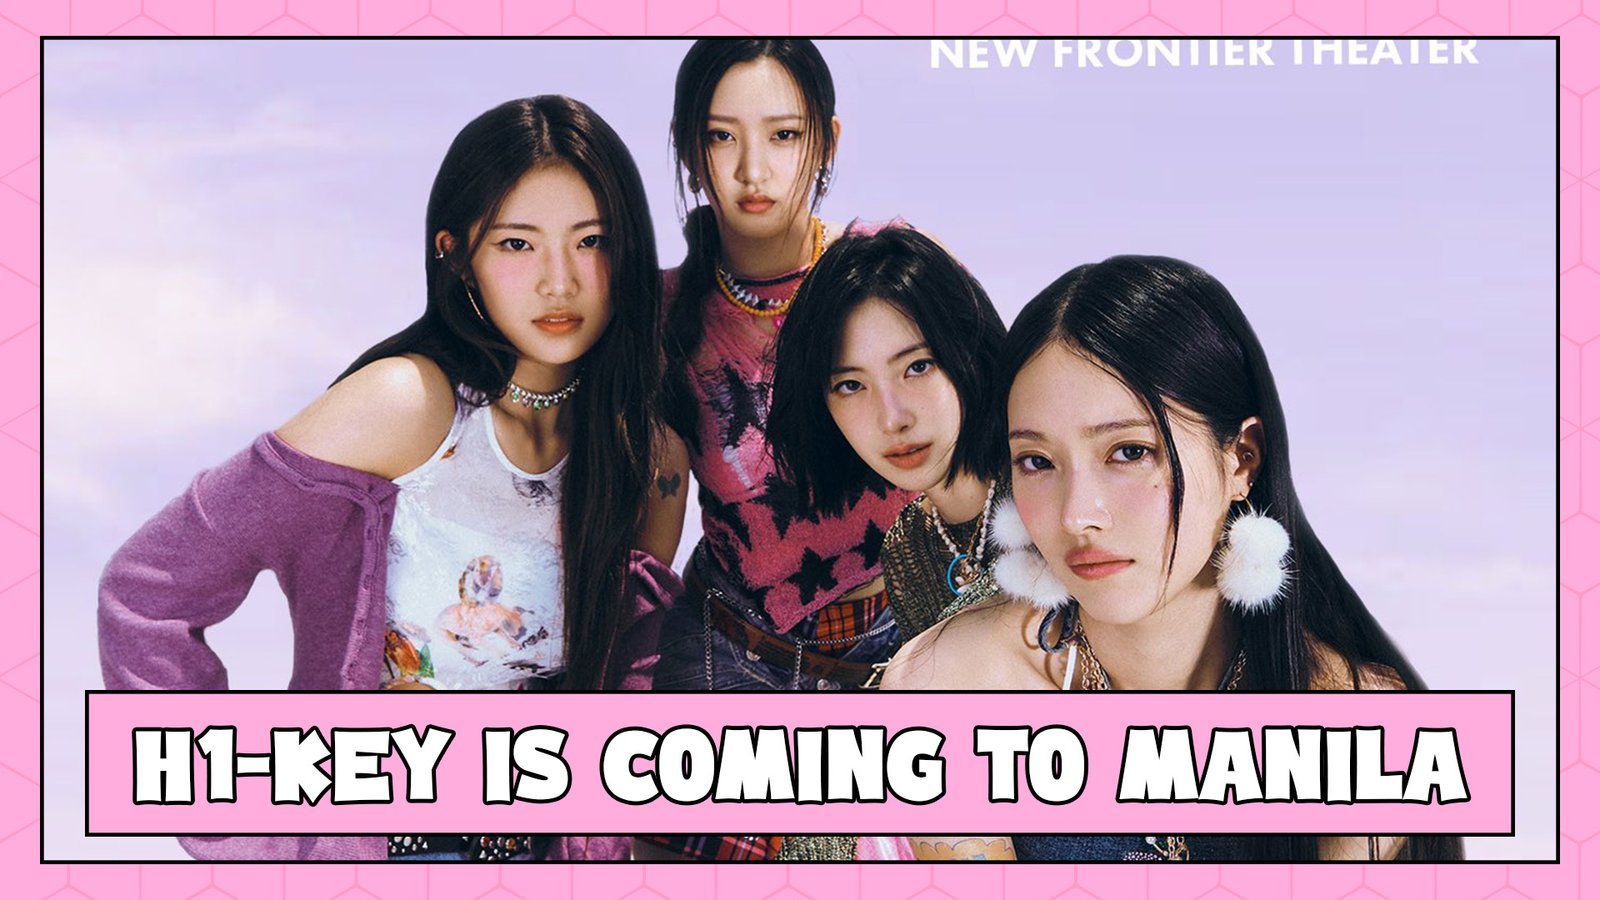 K-POP GIRL GROUP H1-KEY IS COMING TO MANILA!